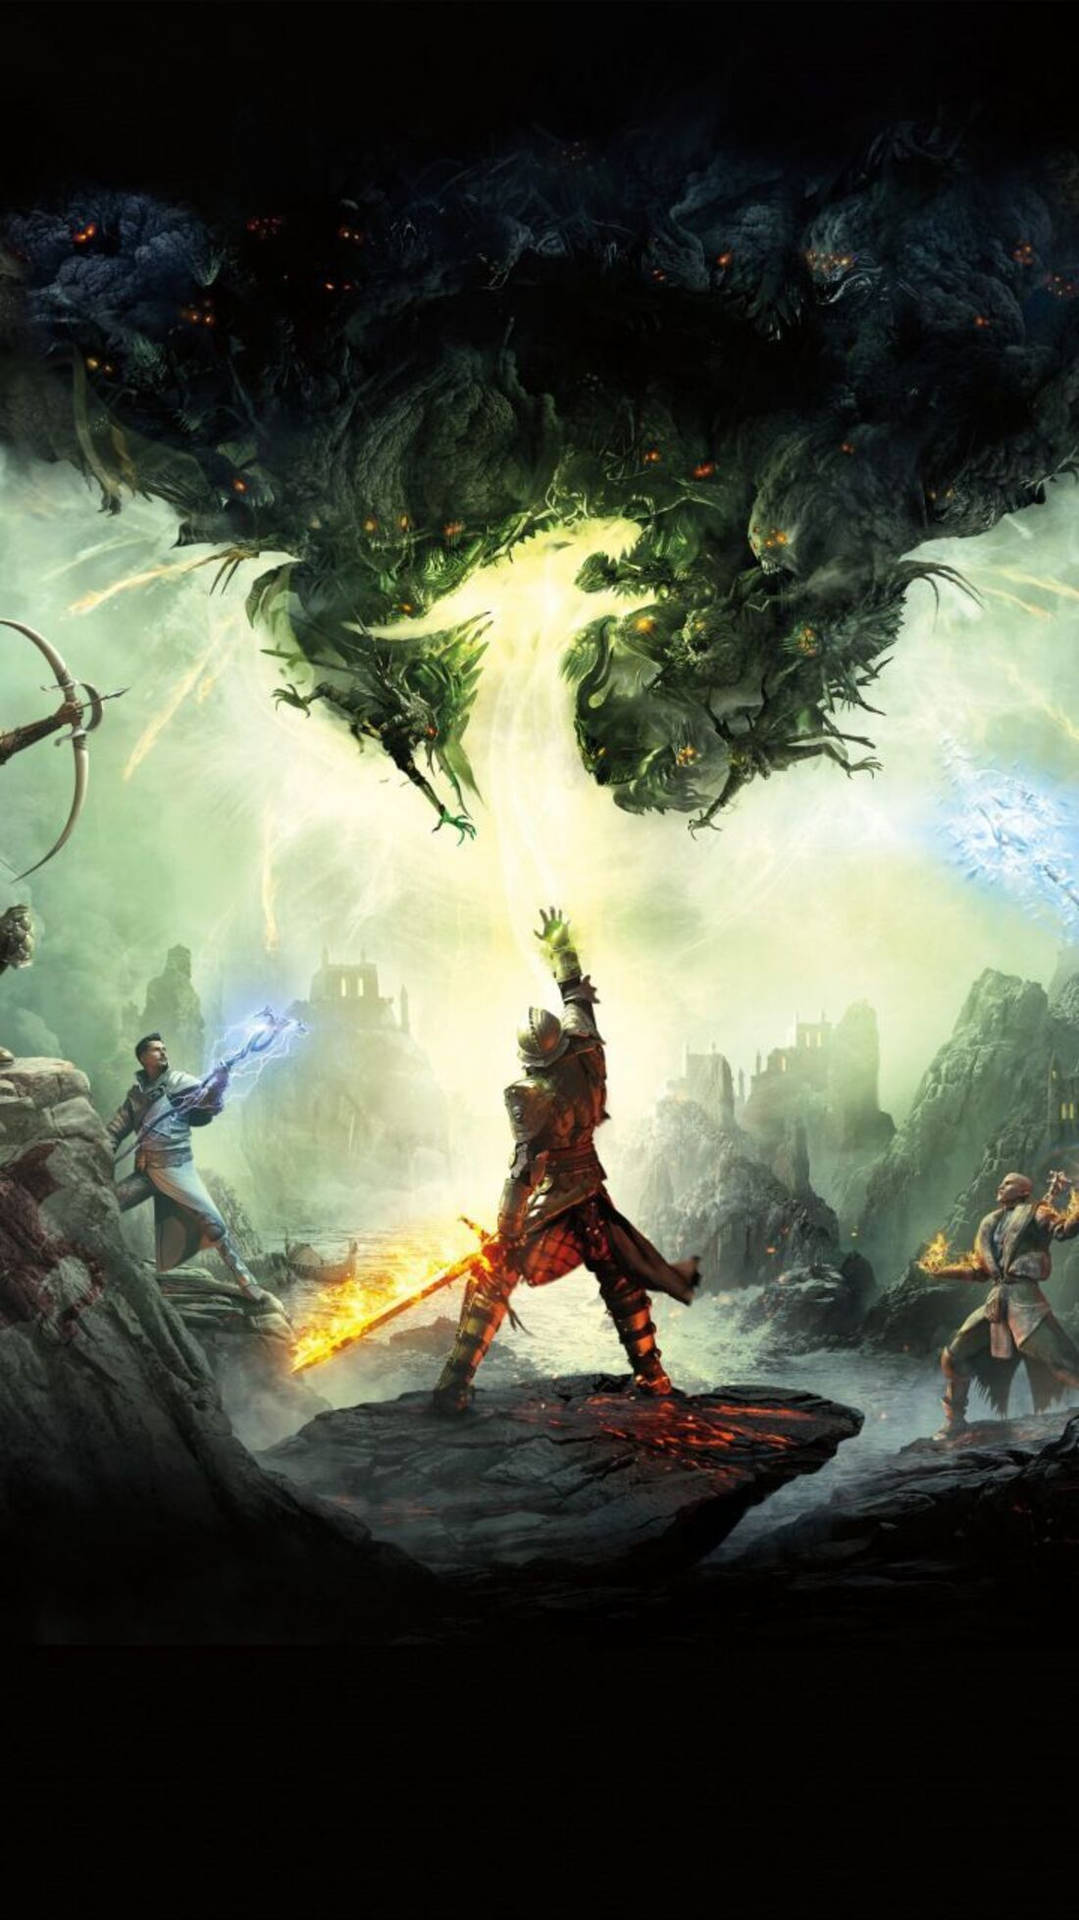 “Experience epic adventures with the Dragon Age Phone.” Wallpaper